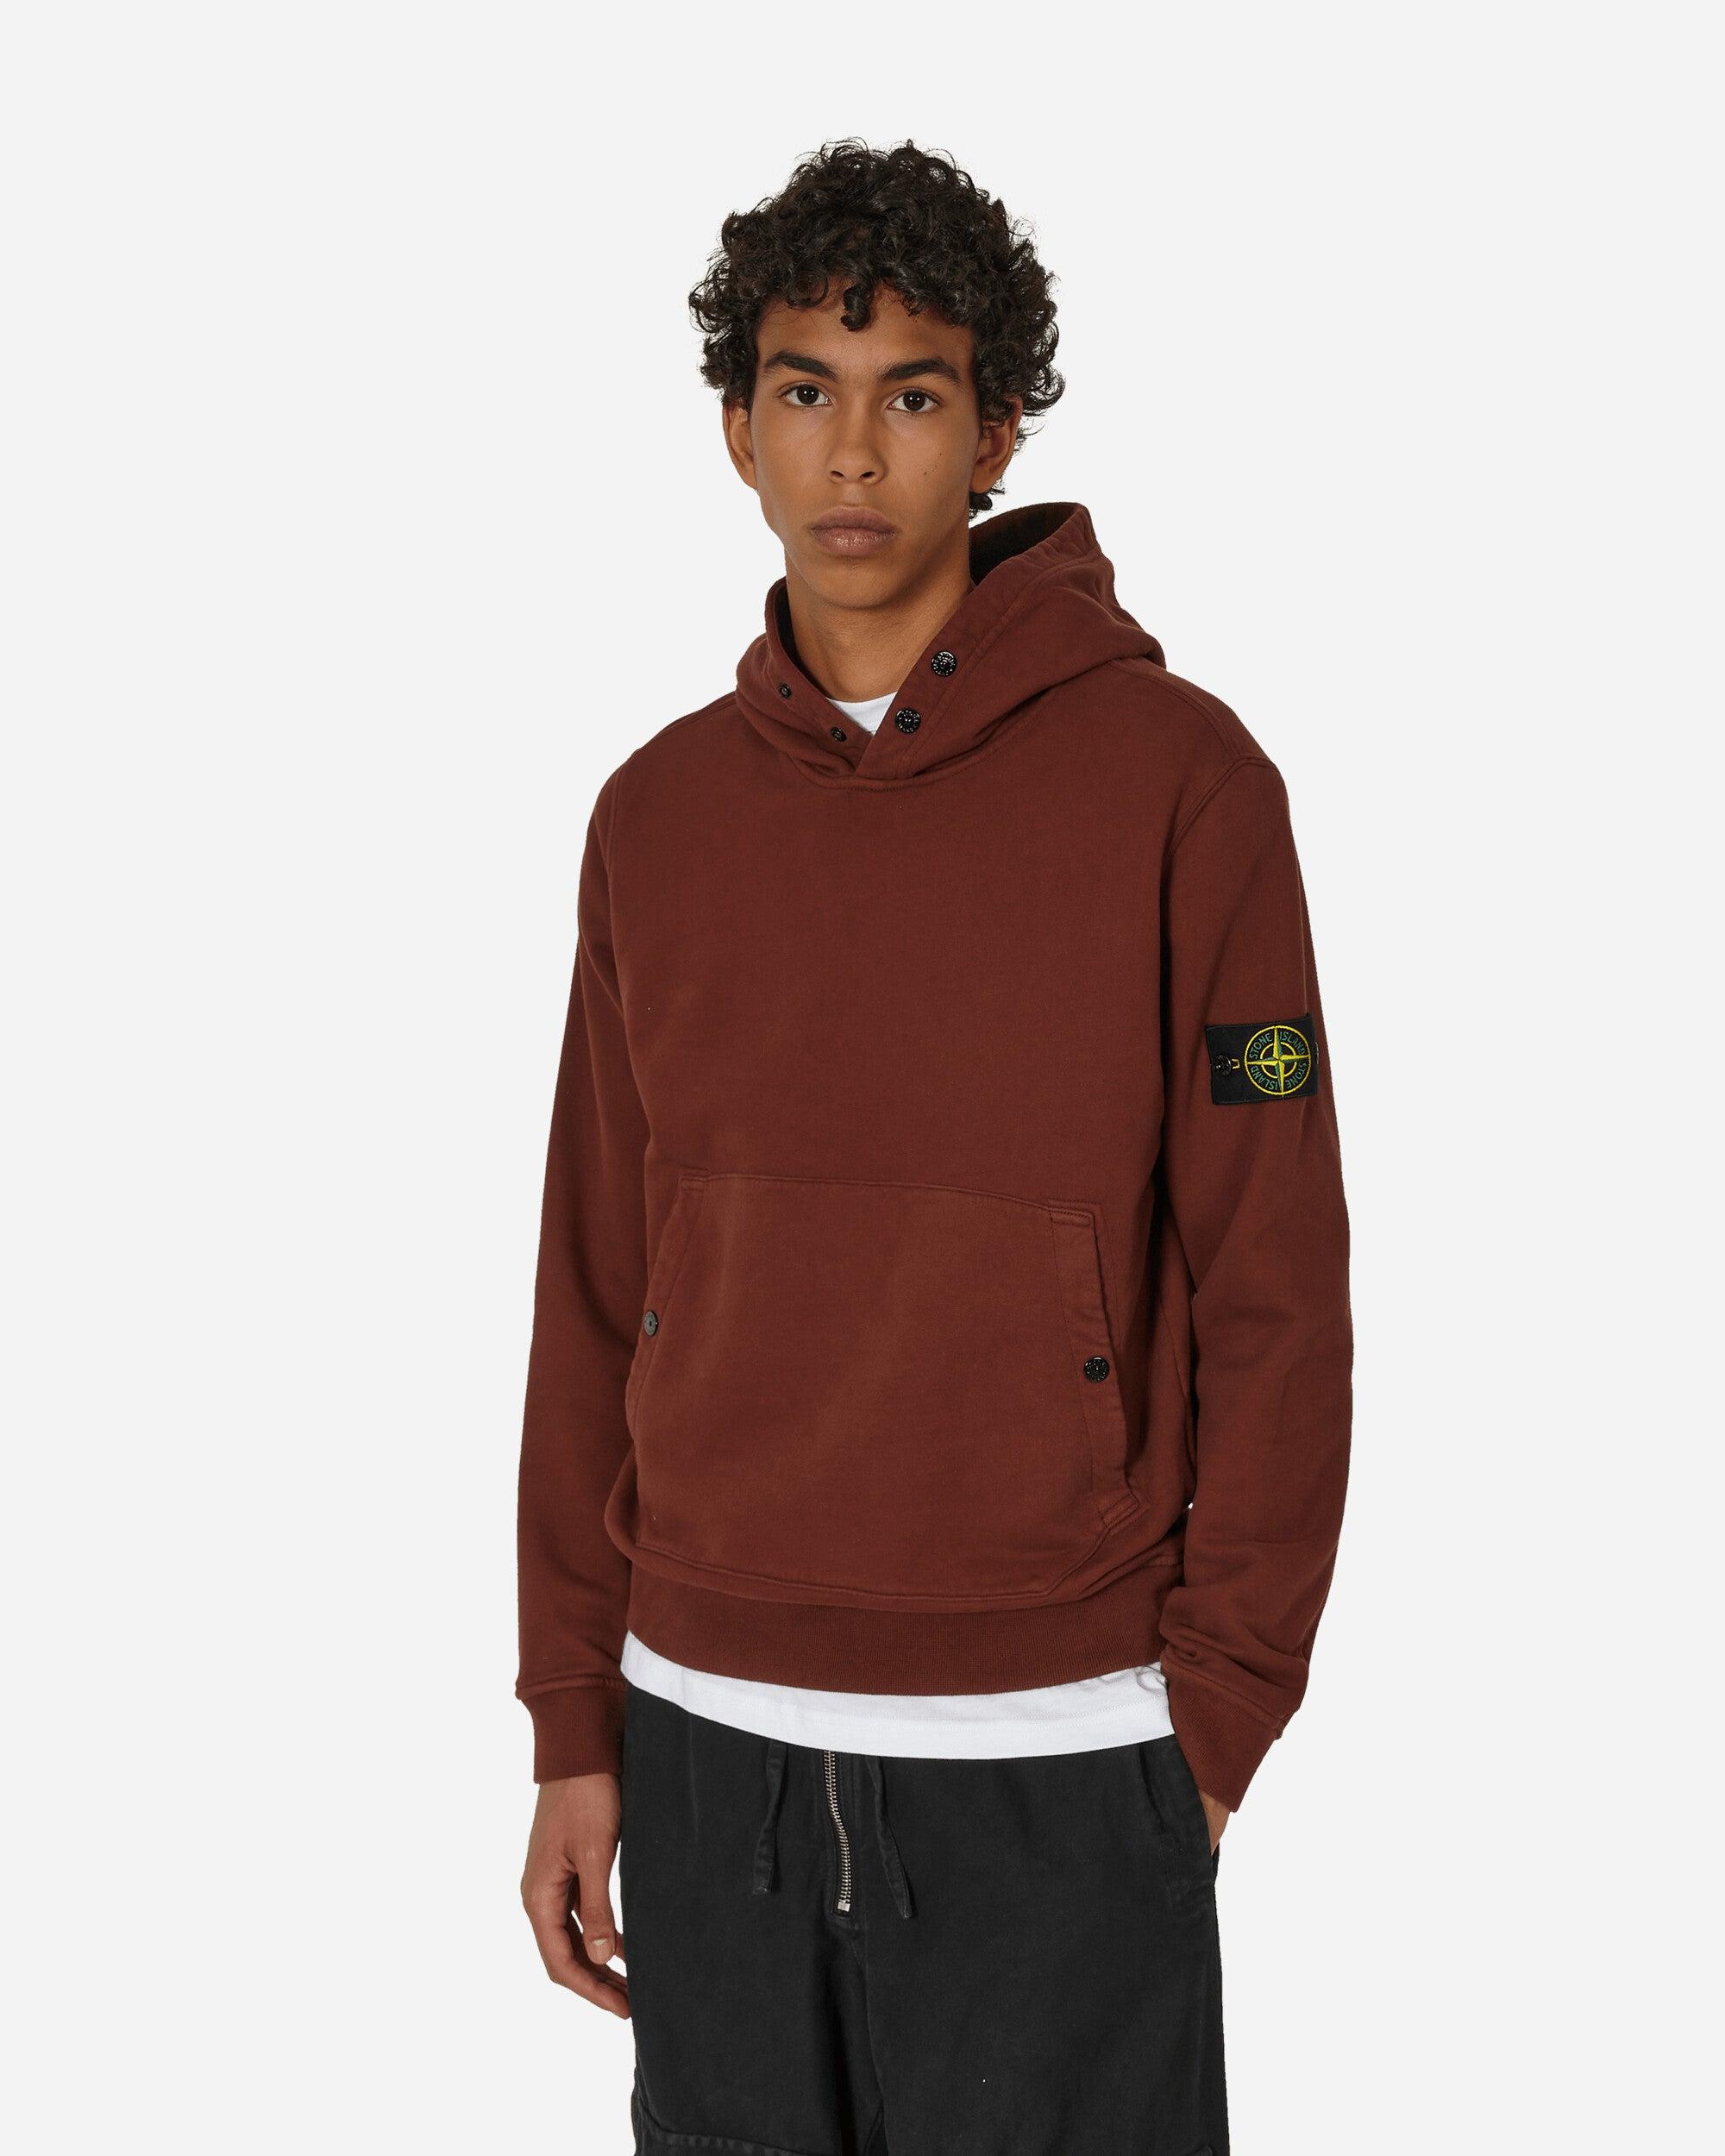 Stone Island Garment Dyed Hooded Sweatshirt Maroon in Red for Men | Lyst